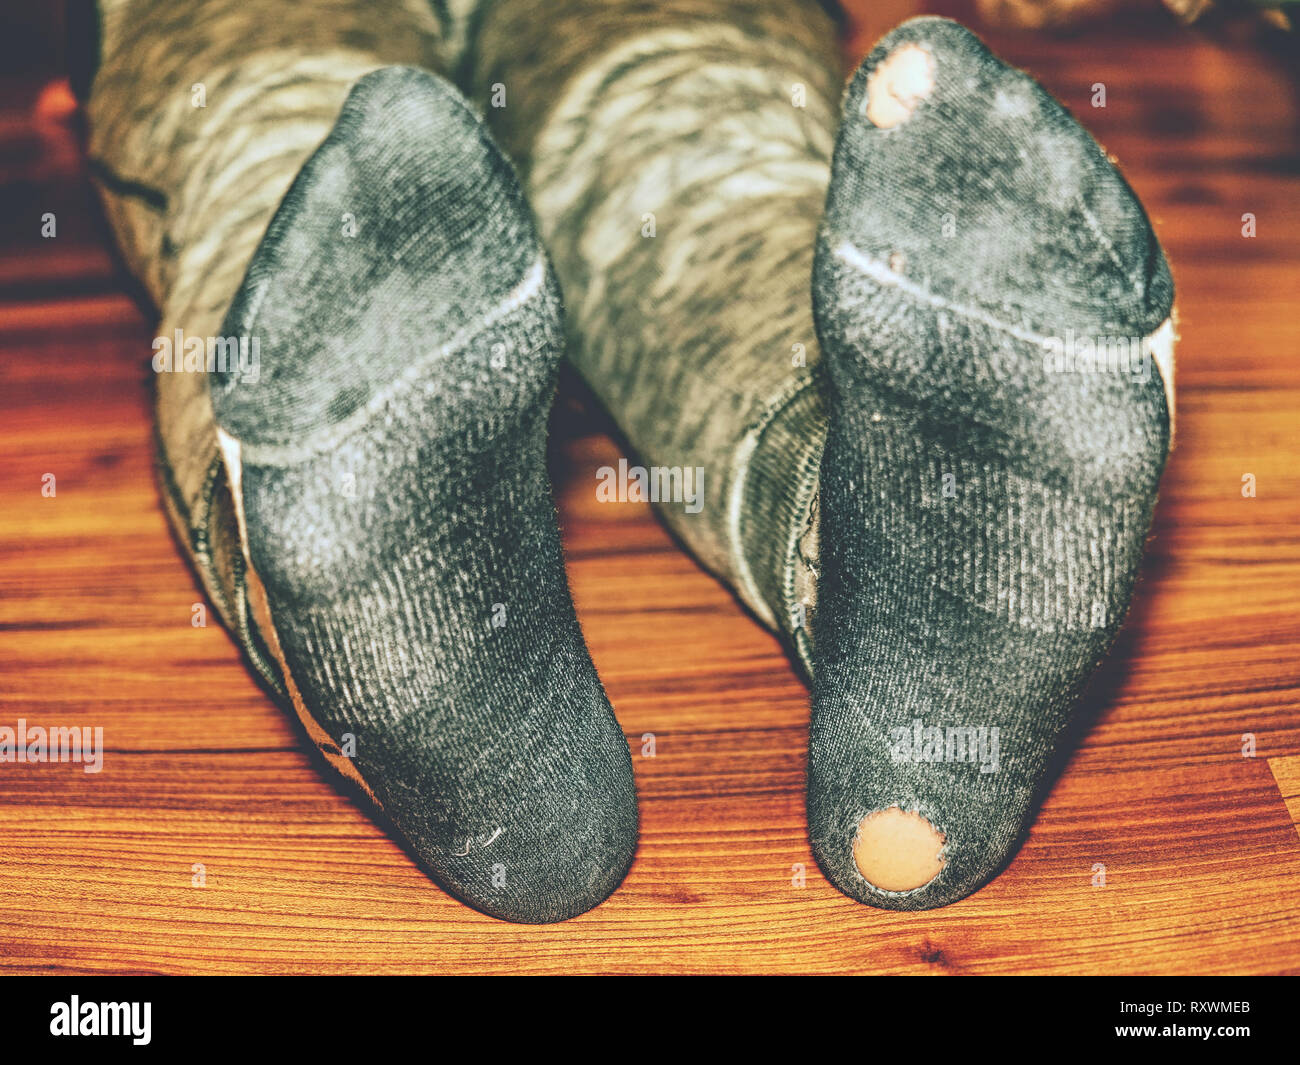 Worn out socks with holes and toes sticking out of them on old wooden floor  Stock Photo - Alamy